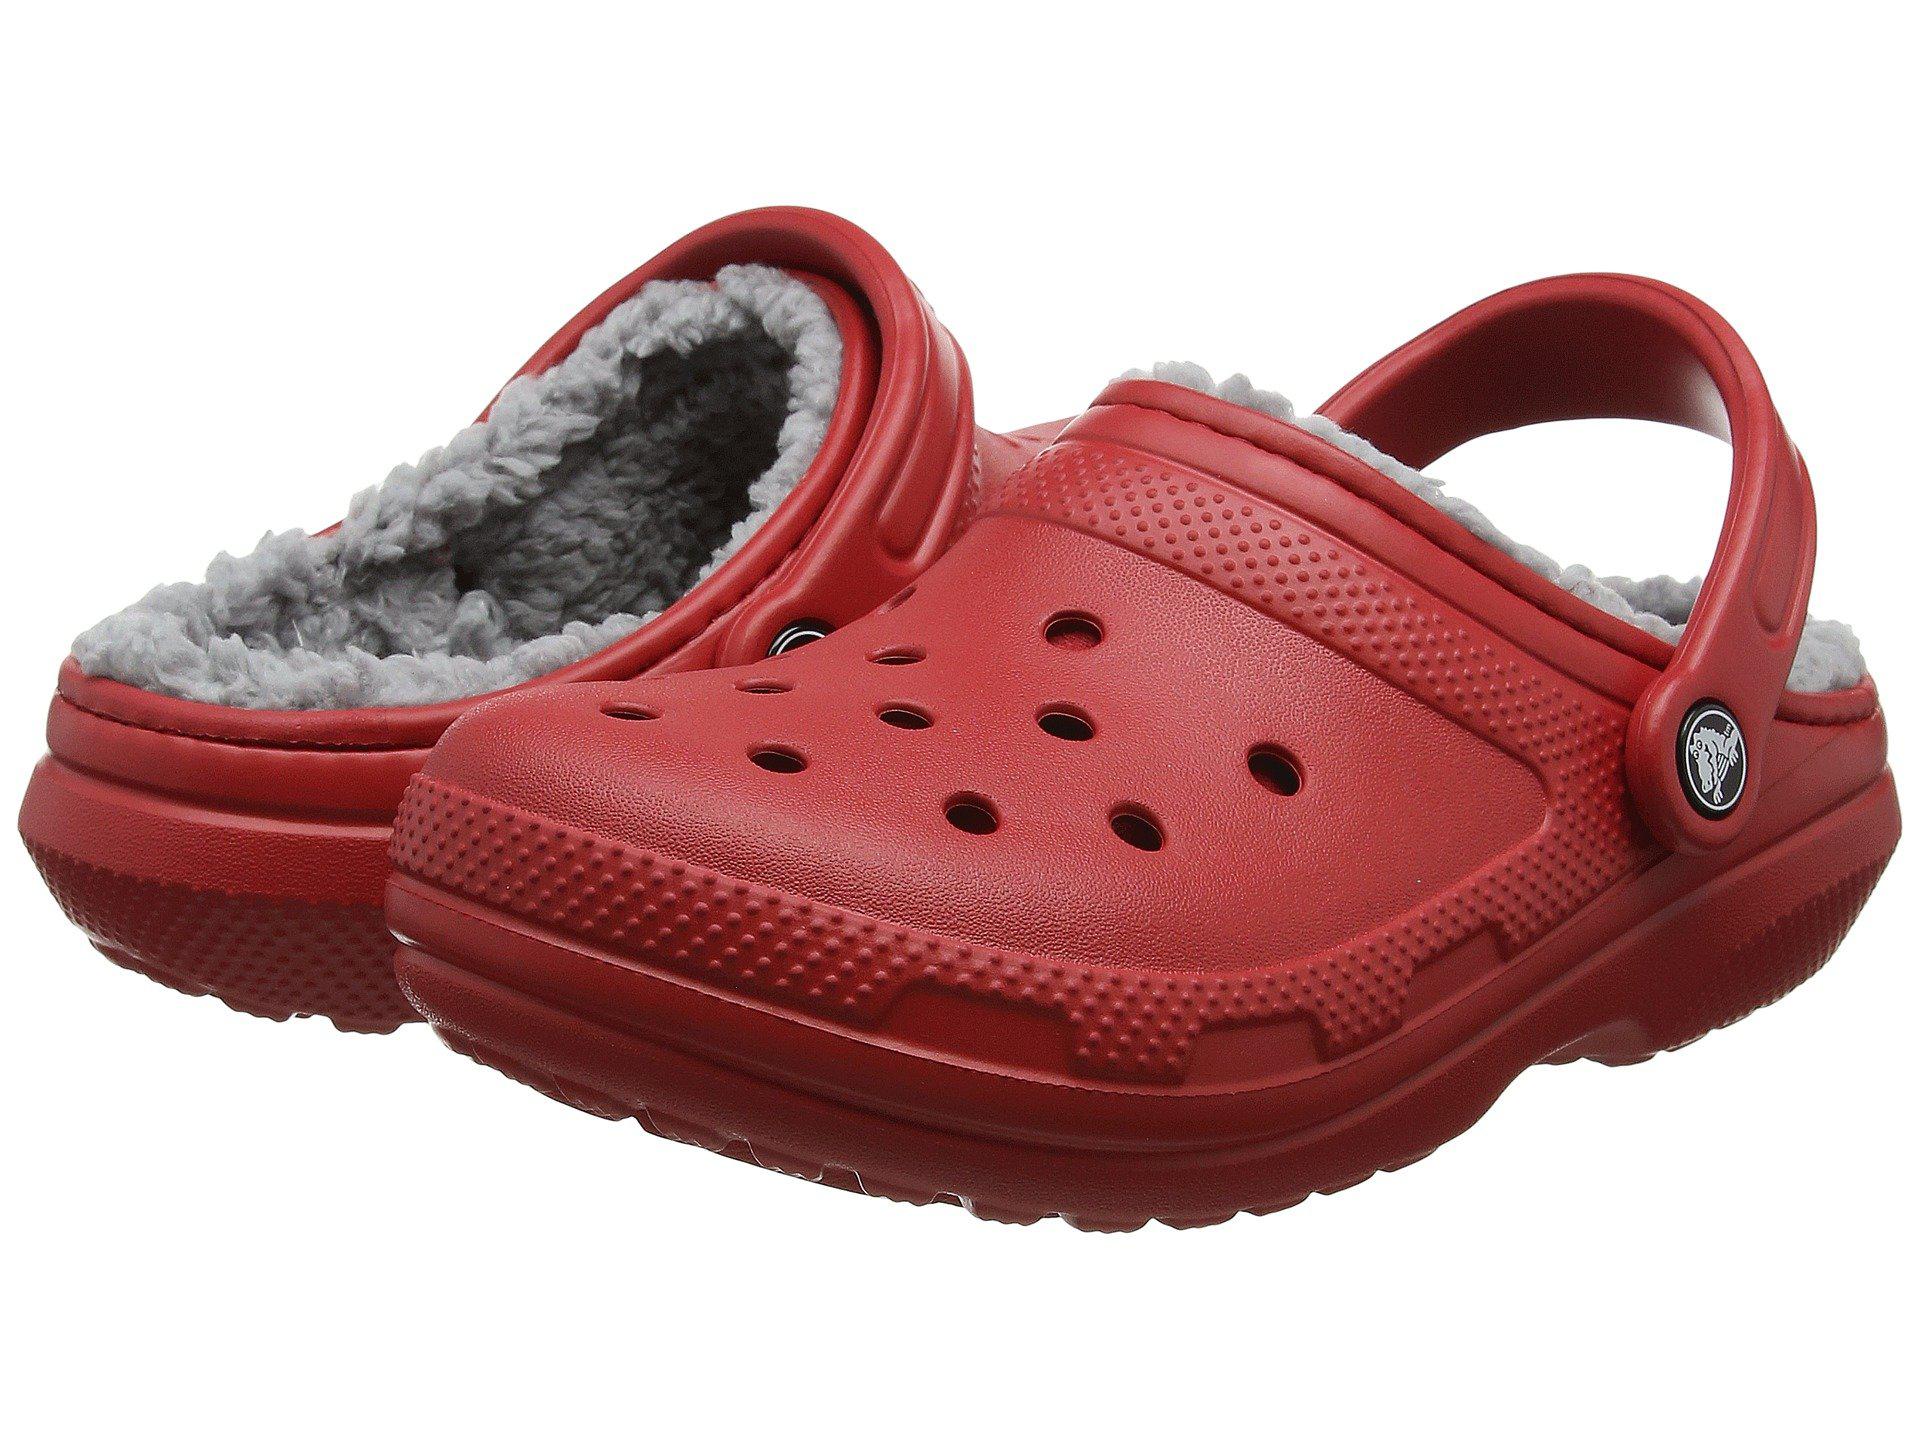 Buy > silver crocs with fur > in stock